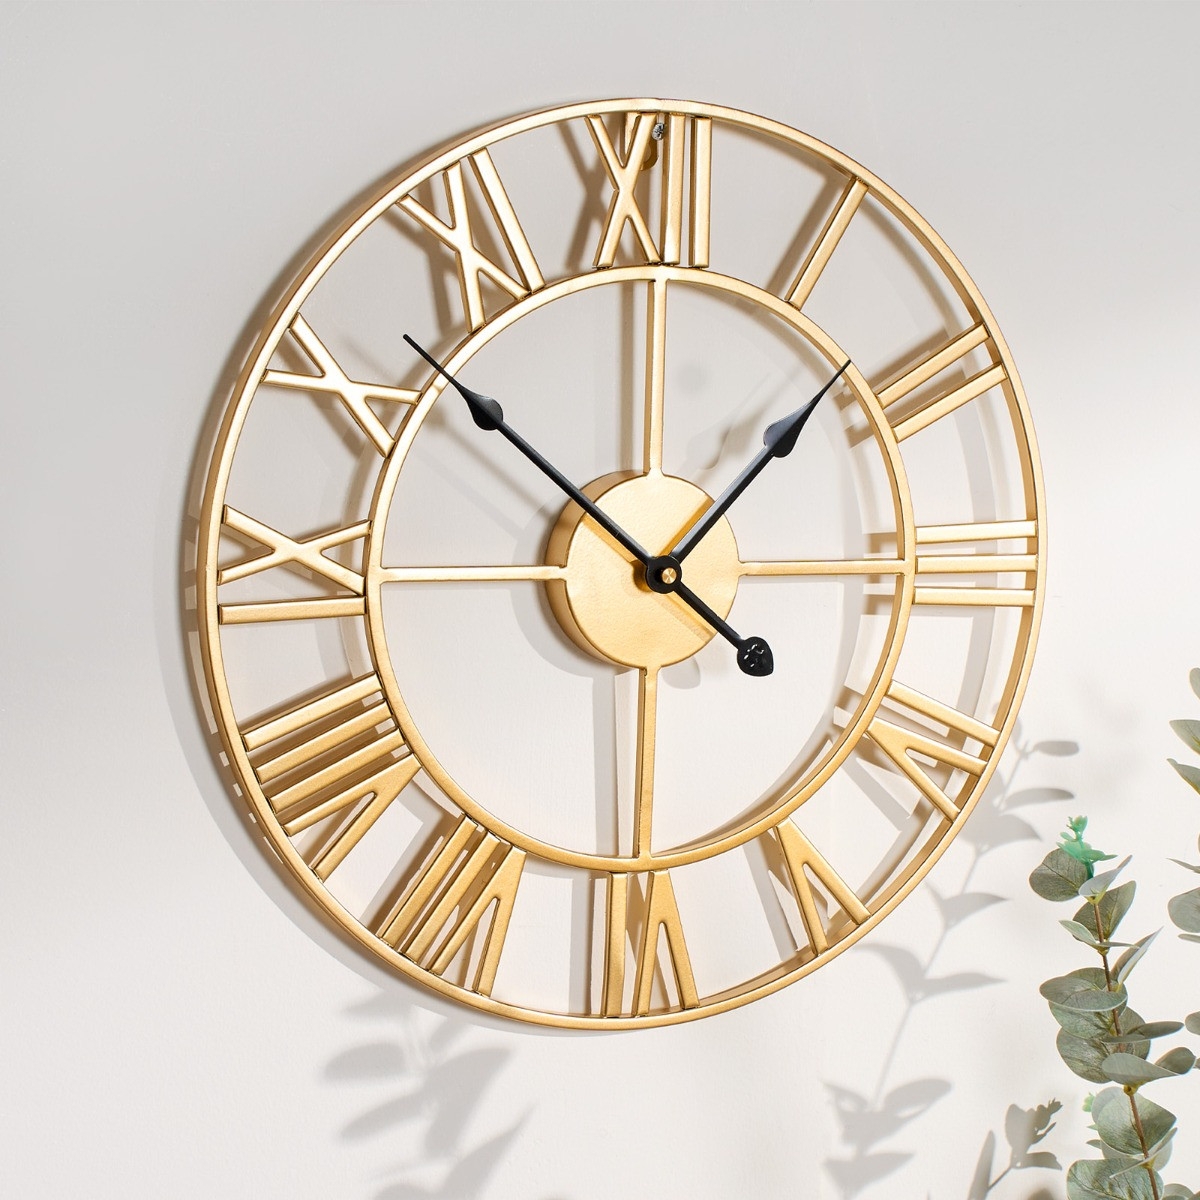 OHS Skeleton Wall Clock - Gold>